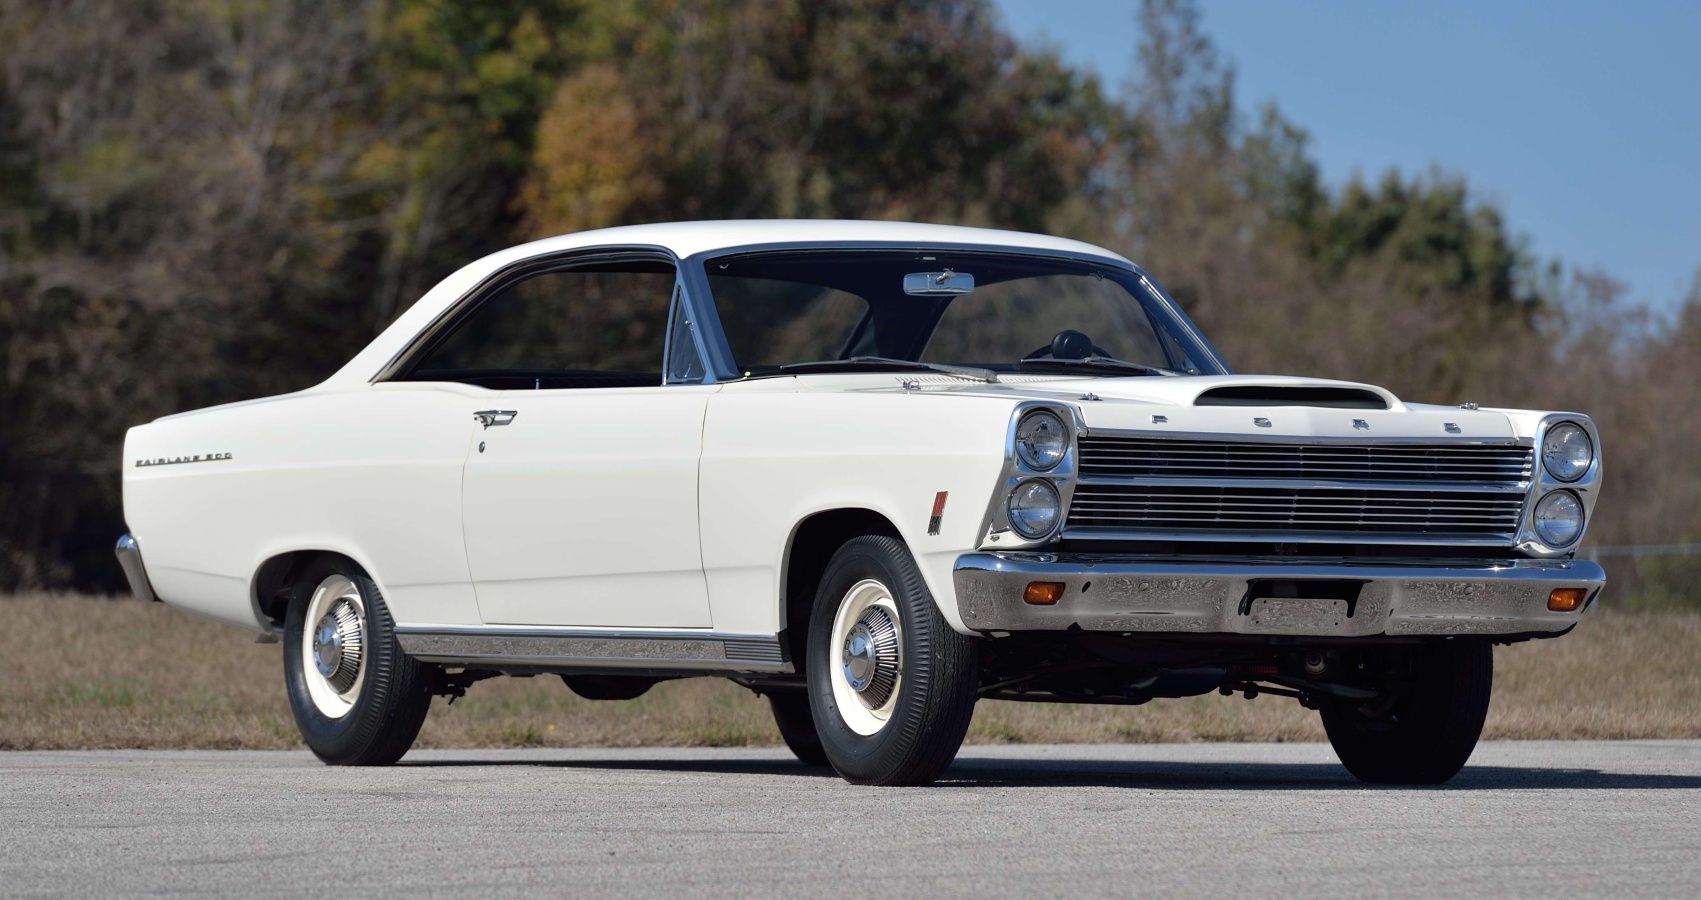 1966 Ford Fairlane R-Code Featured Image Cropped